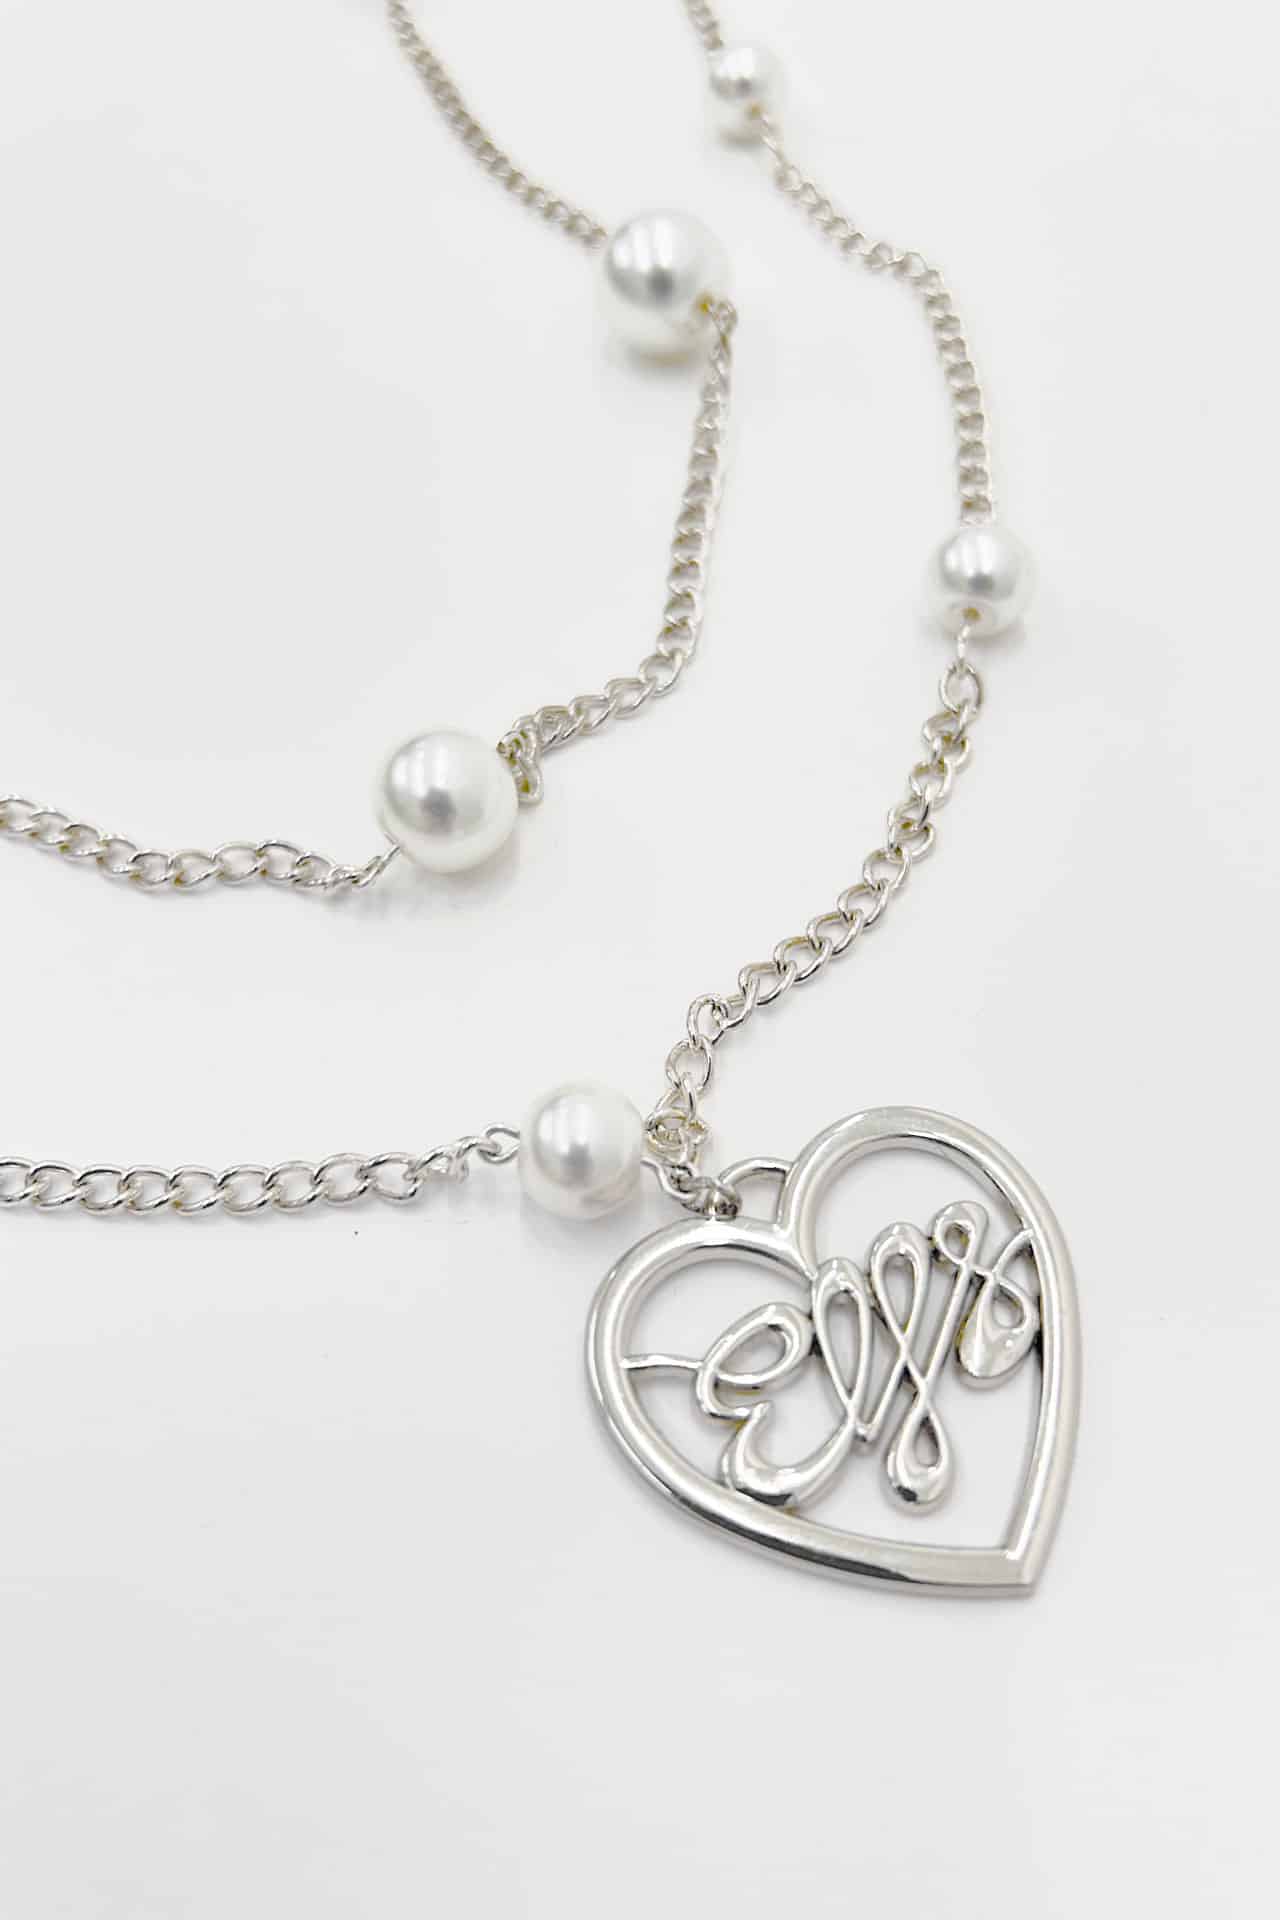 ☆ELFS☆ - SILVER NECKLACE WITH PEARLS